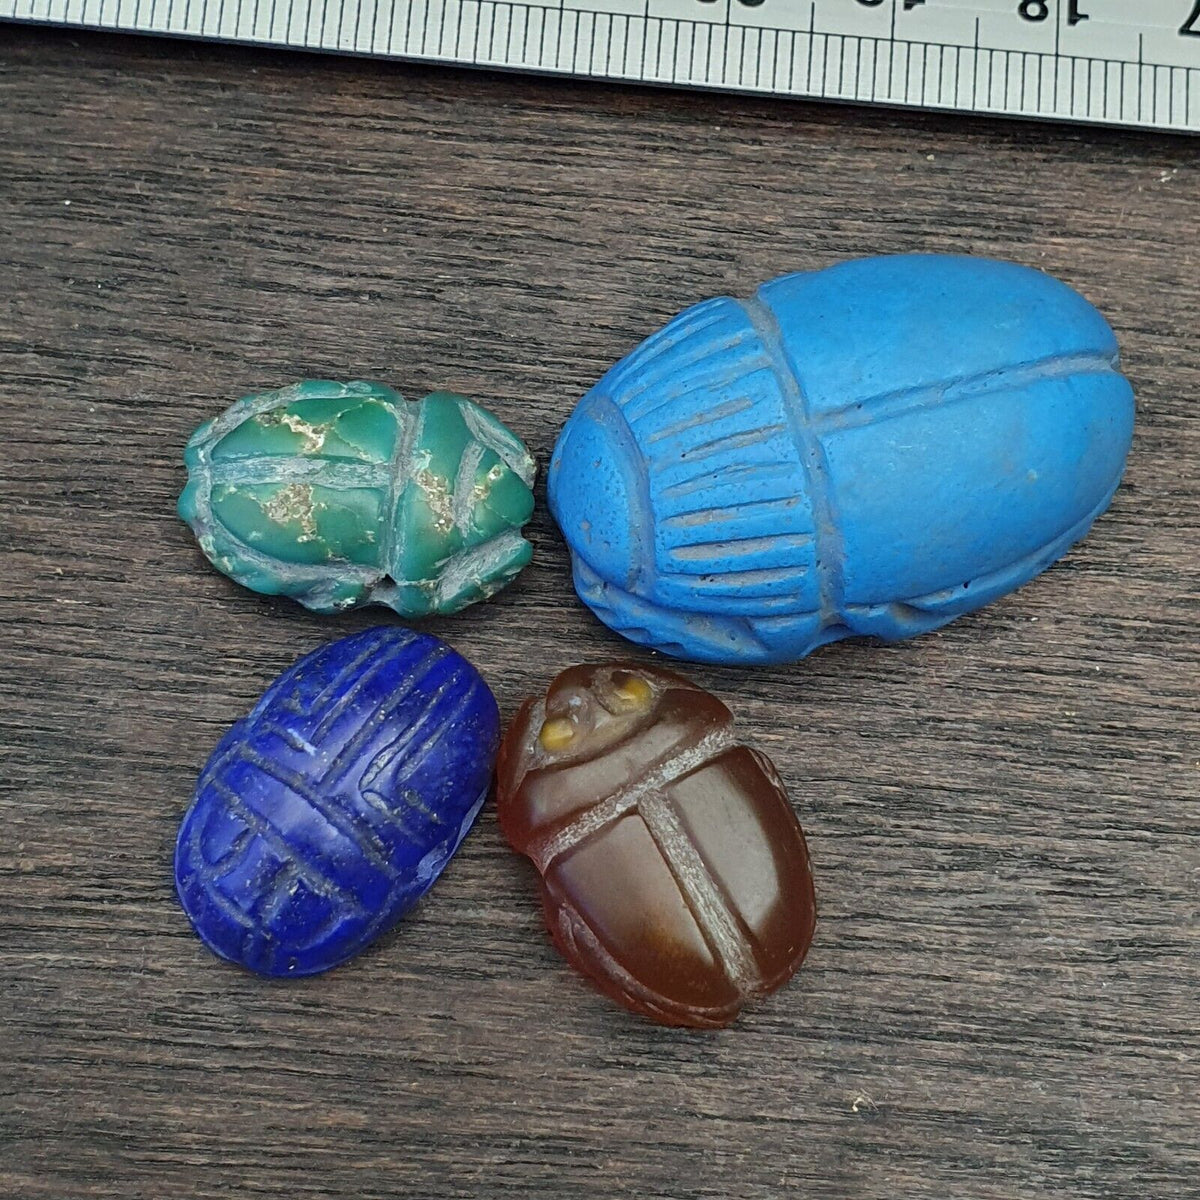 Lot 4 Pieces Vintage Jewelry Egyptian Art Scarab Stamp Bead Amulet Engrave